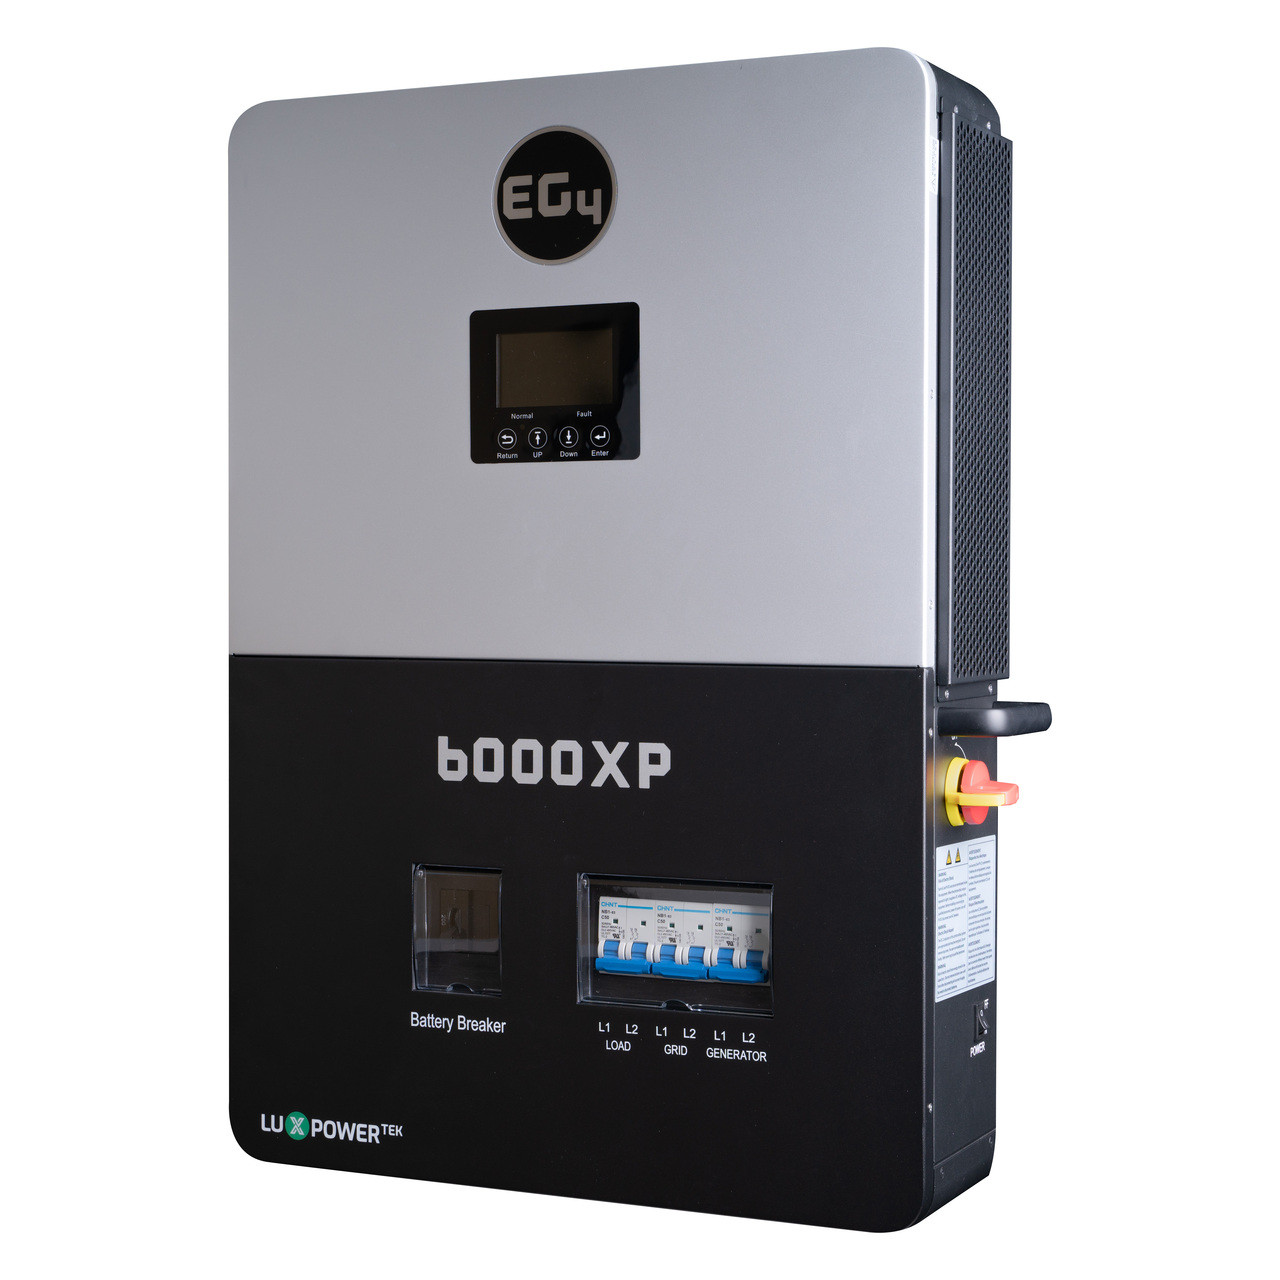 MPP Solar LV6548 Hybrid Solar Inverter UL Listed 120V (Battery Optional) | 6,500W Continuous / 240V w/ Two or More Units | 8,000W Solar PV Input